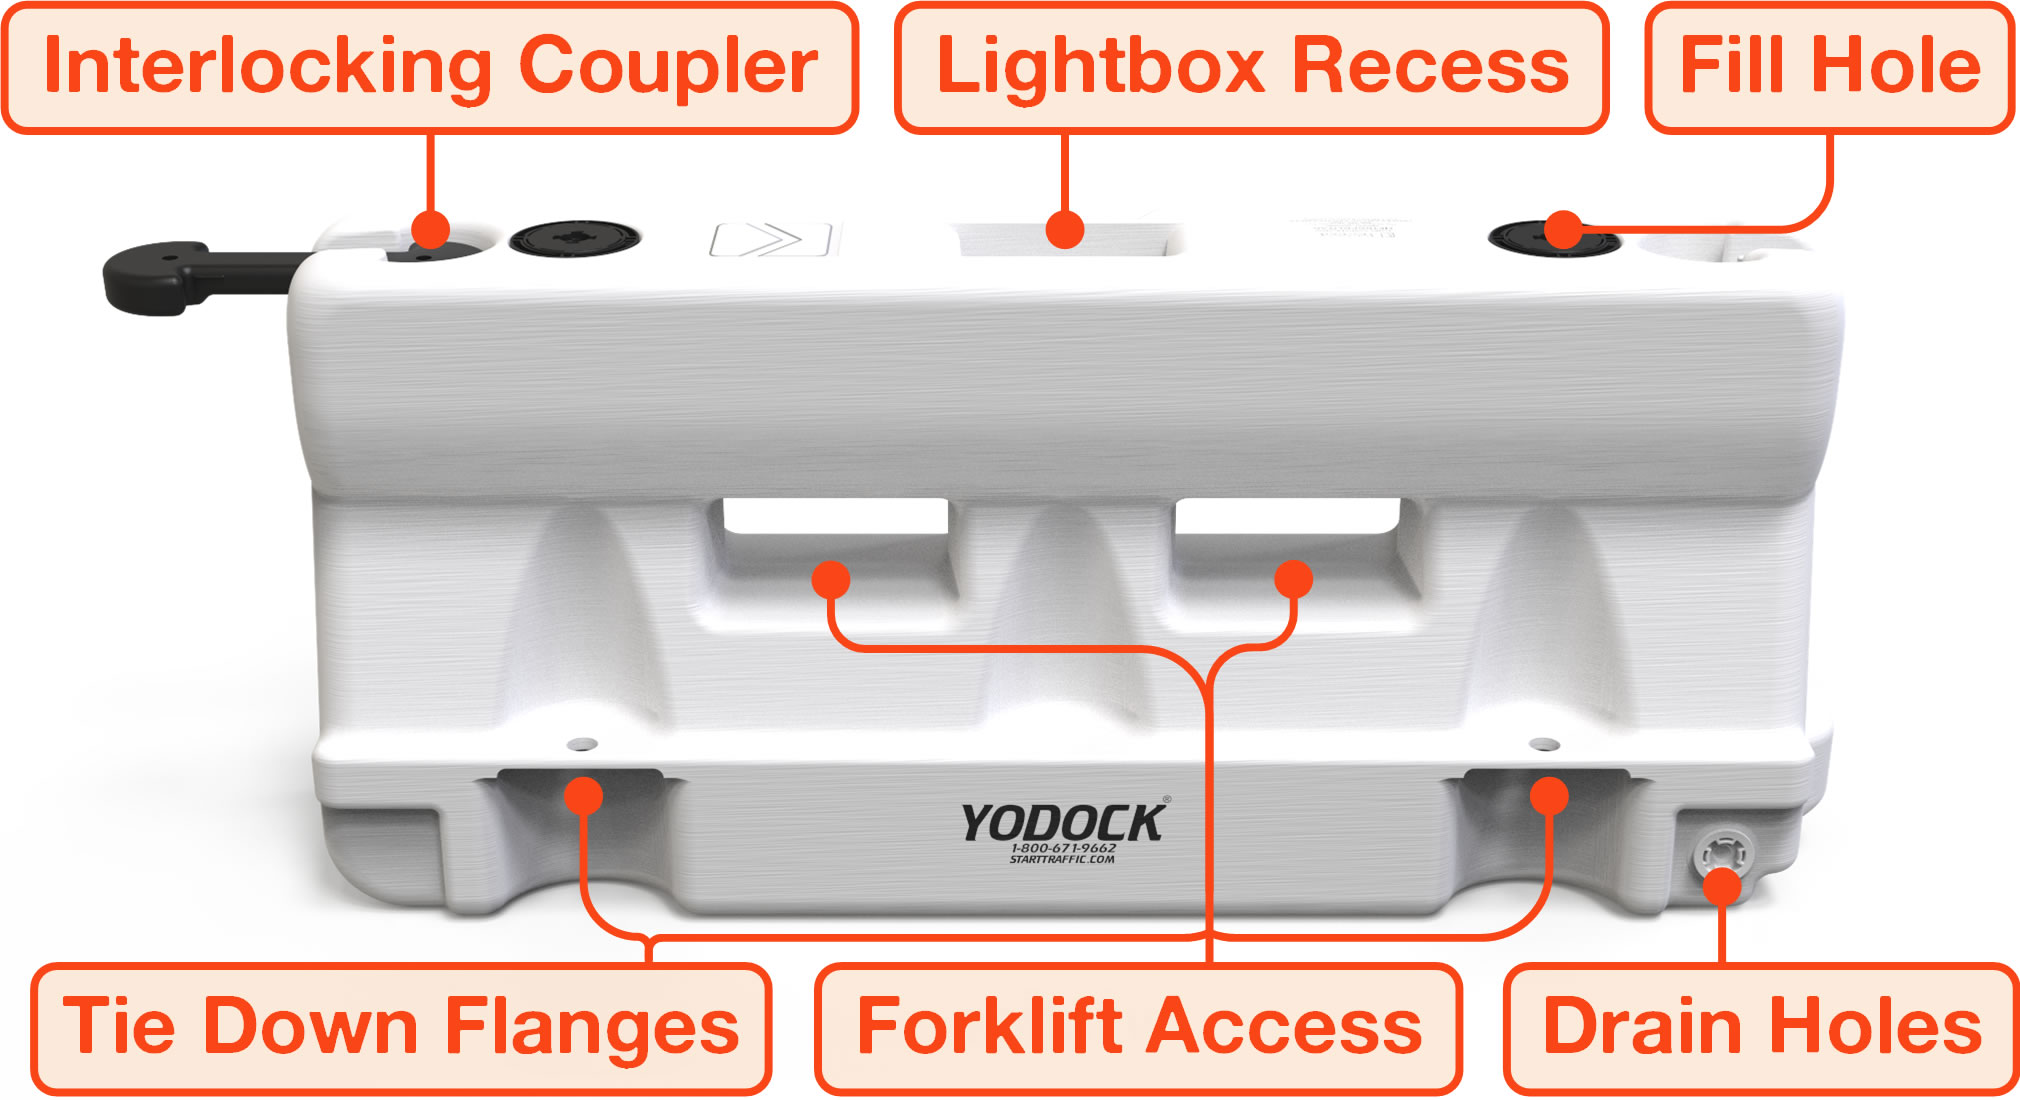 Yodock 2001MB Illustrated Features